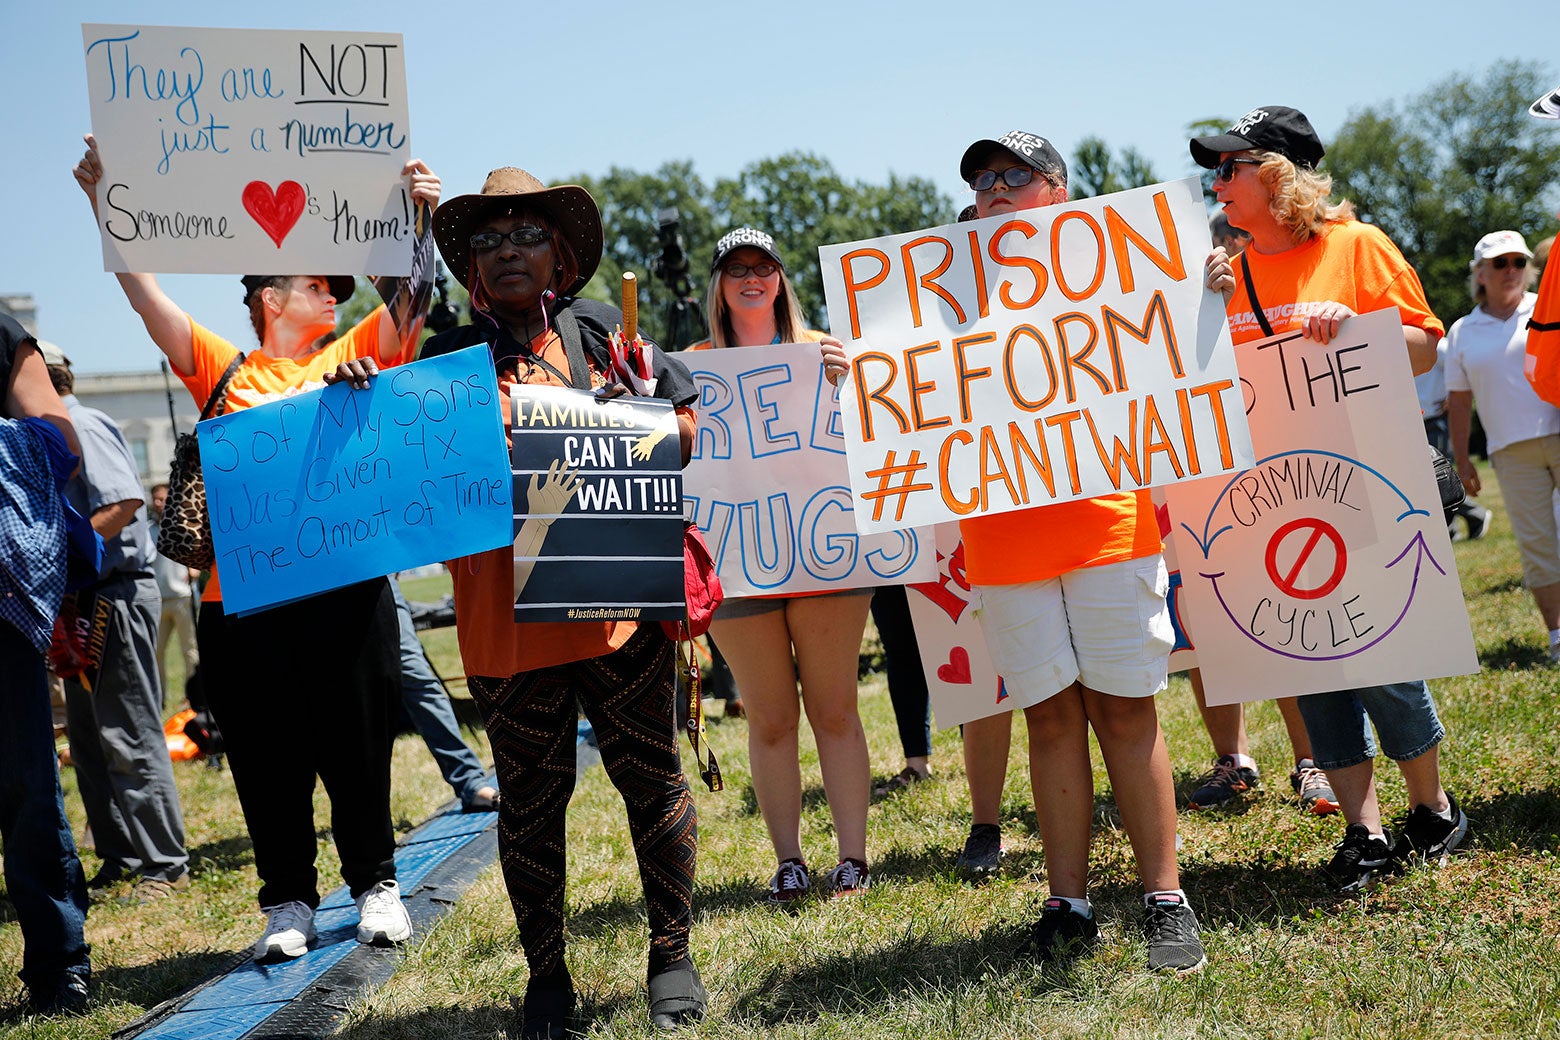 Protesters hold signs during a rally calling for criminal justice reform.